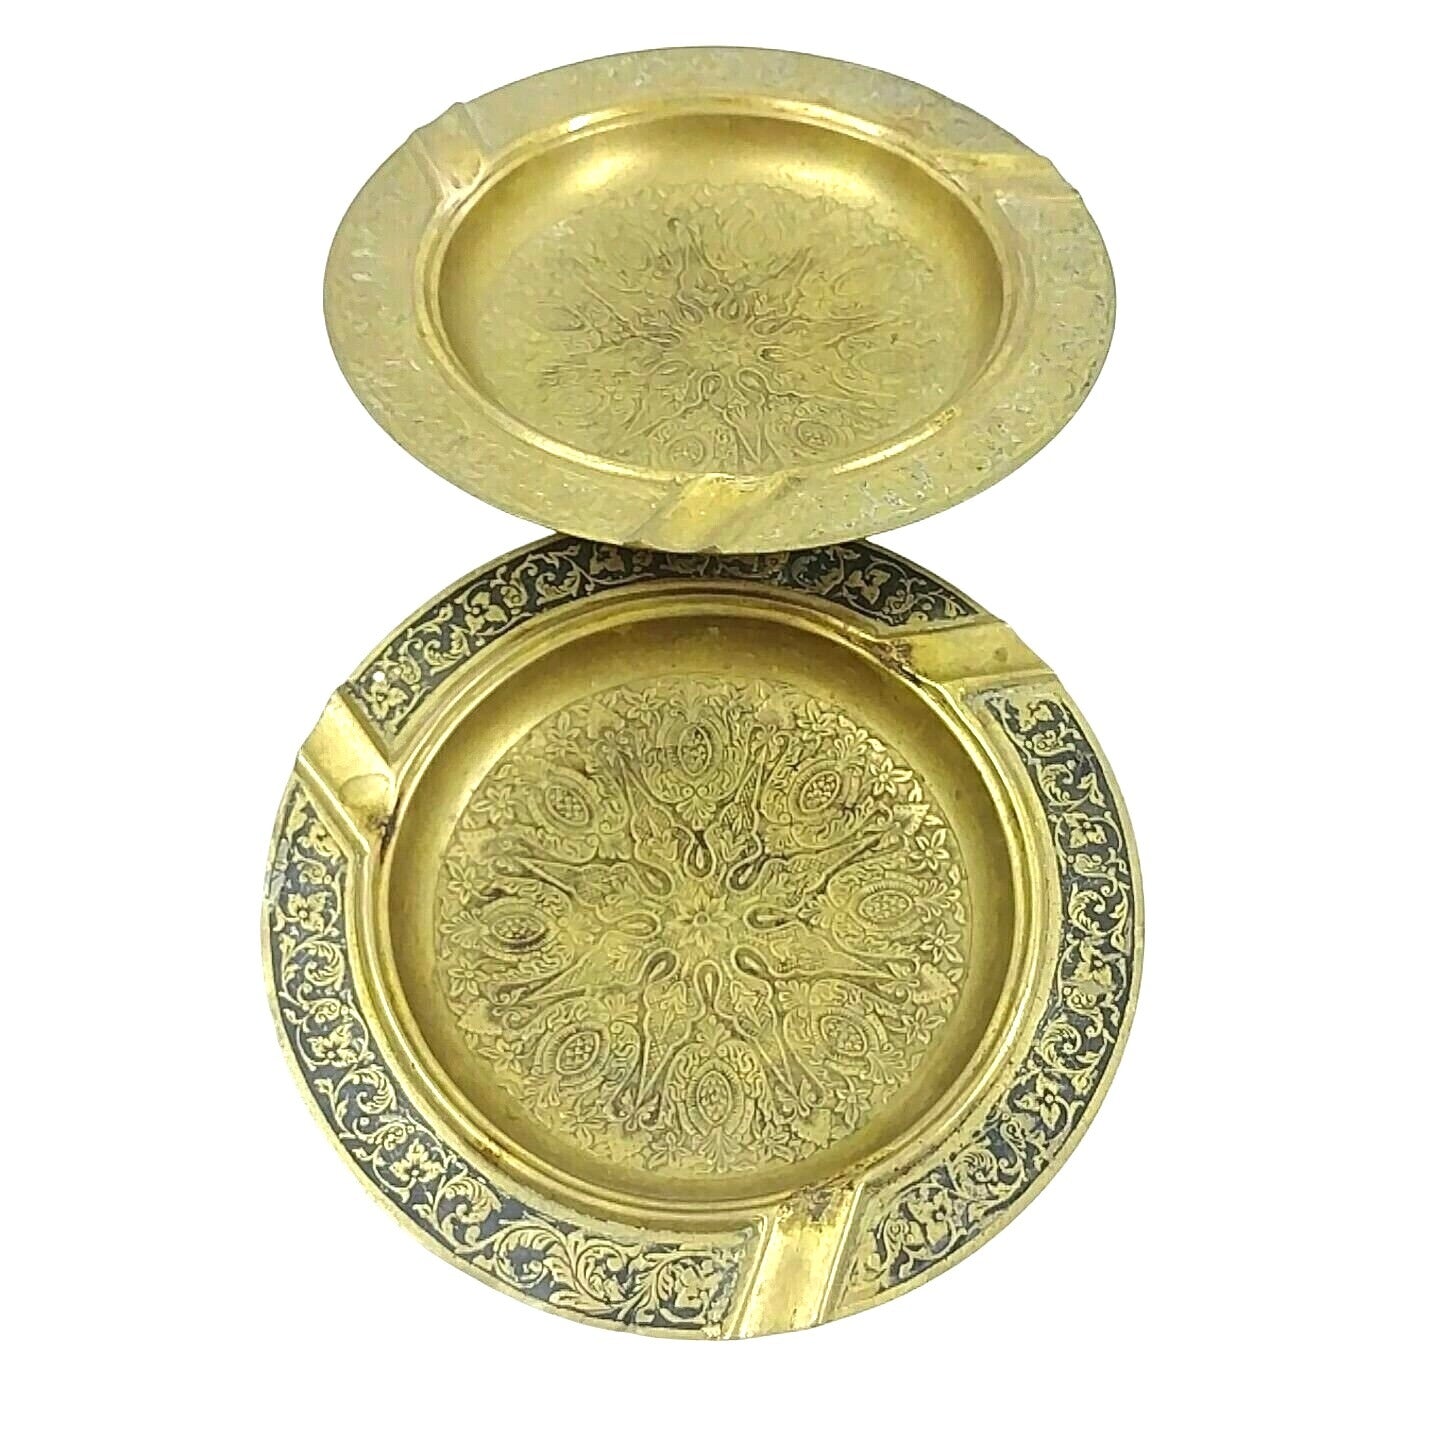 Brass Ashtrays with Tooled Embossed Raised Relief Floral Pattern Vintage